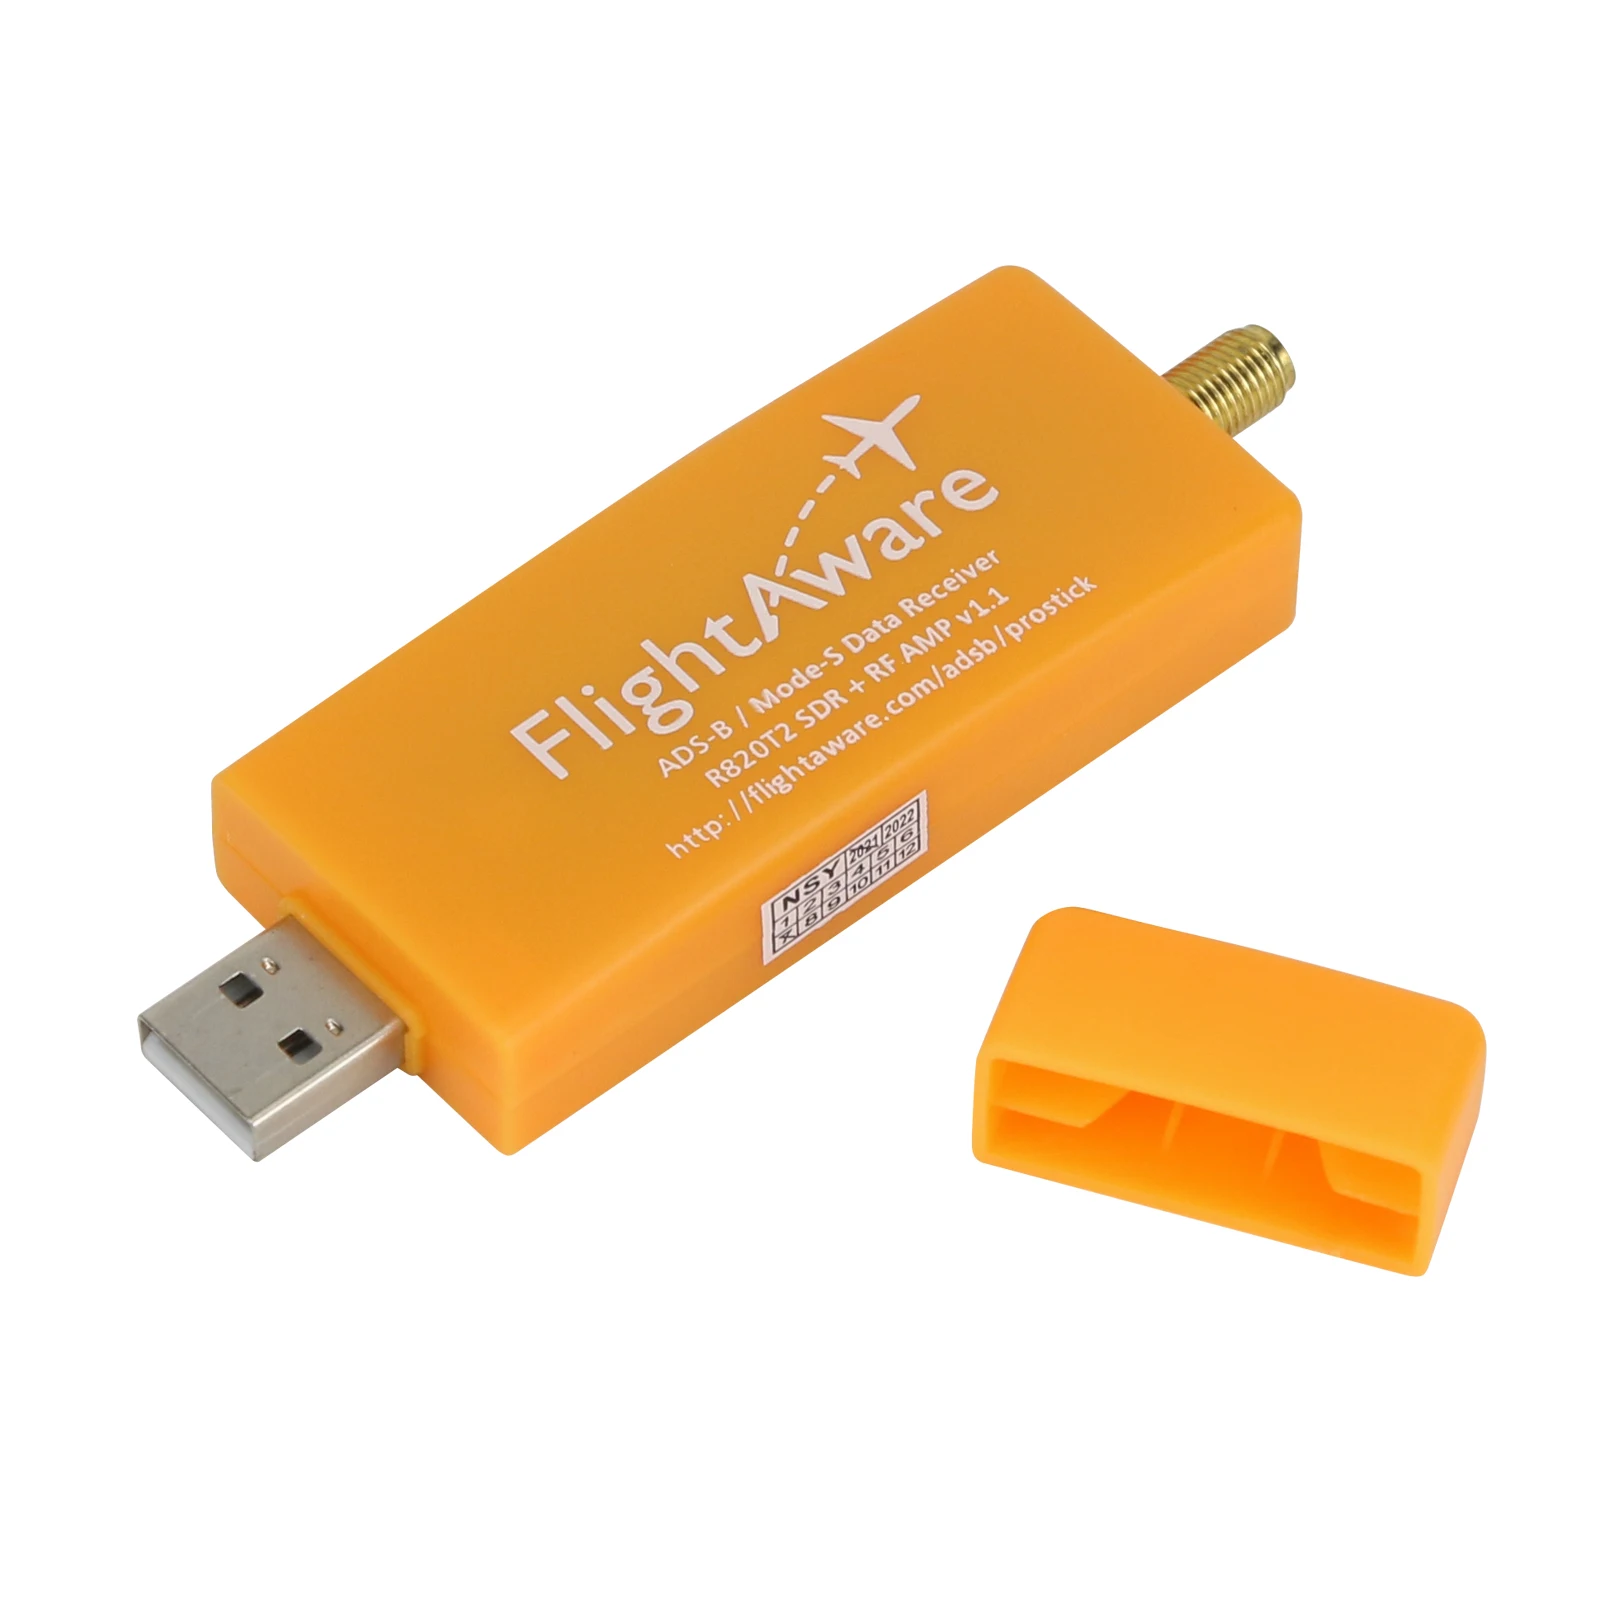 Wholesale FlightAware Pro Stick USB SDR Data ADS-B Receiver with R820T2 Chip Built-in Amplifier SMAF m.alibaba.com